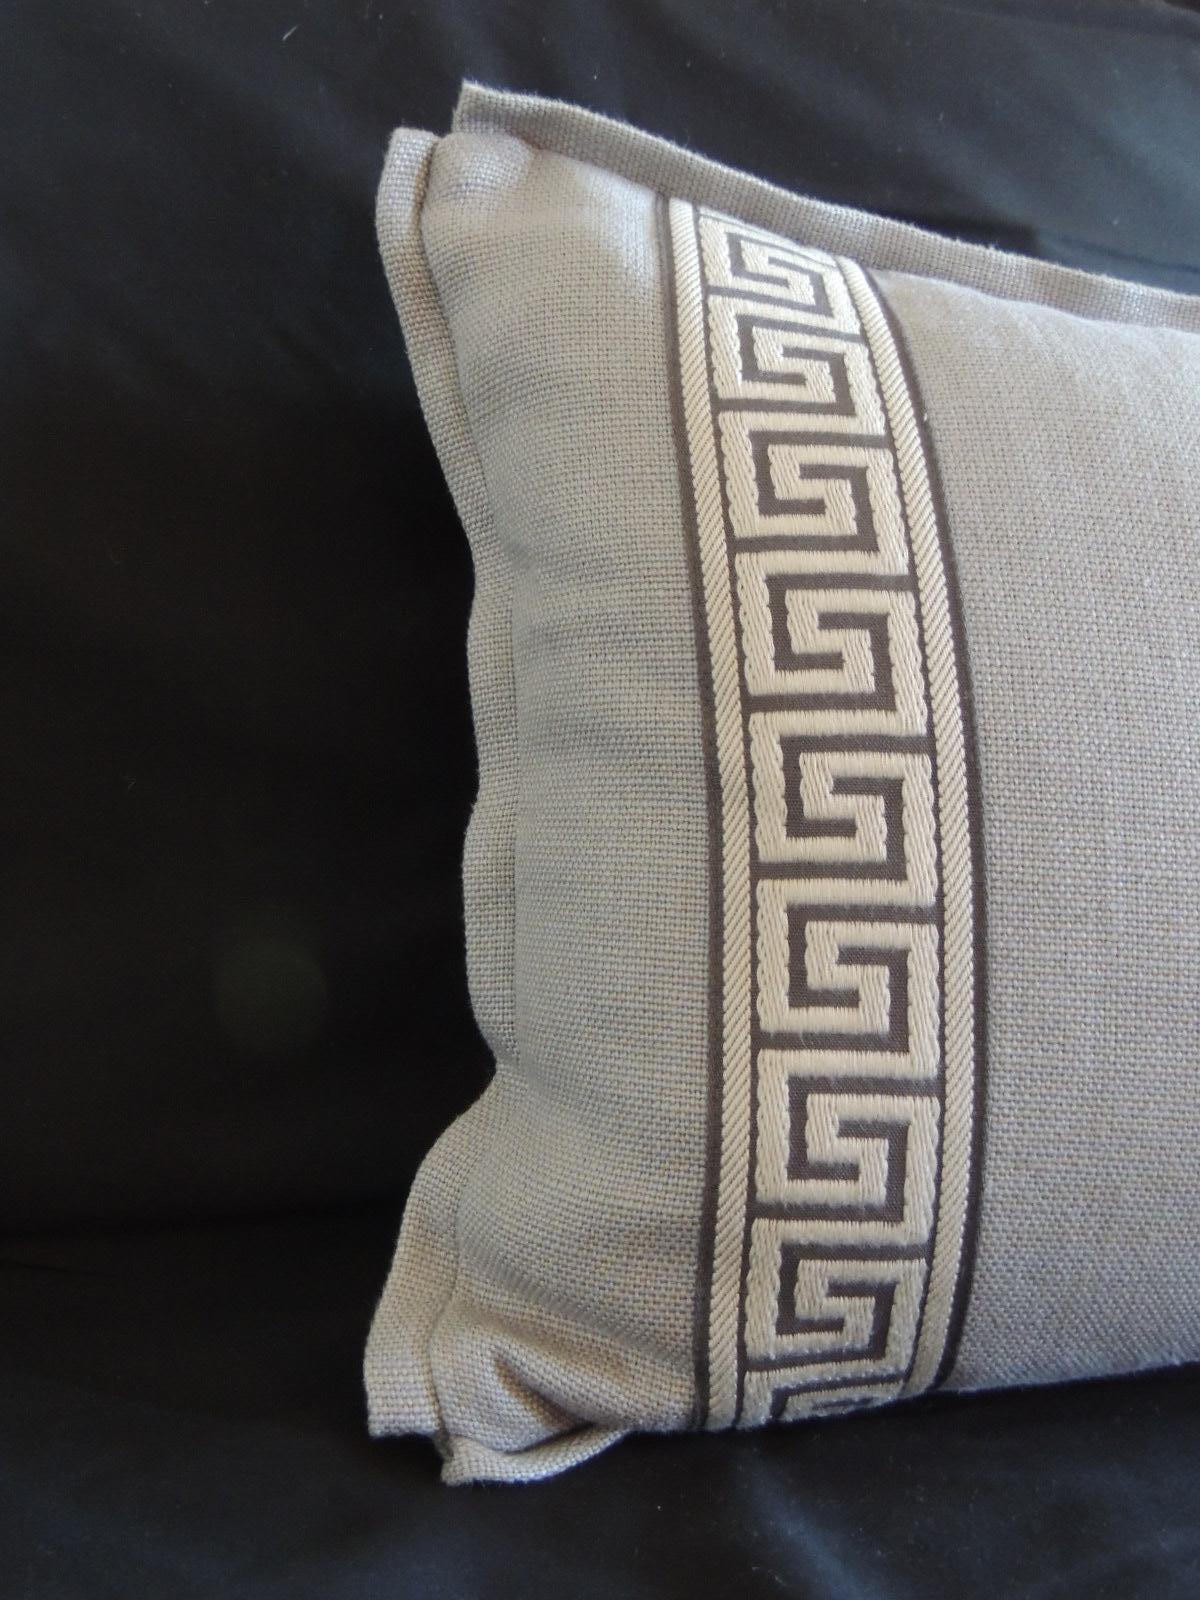 Gray and blue with Greek key trim decorative linen pillow. Double sided and small flat trim all around.
Size: 14